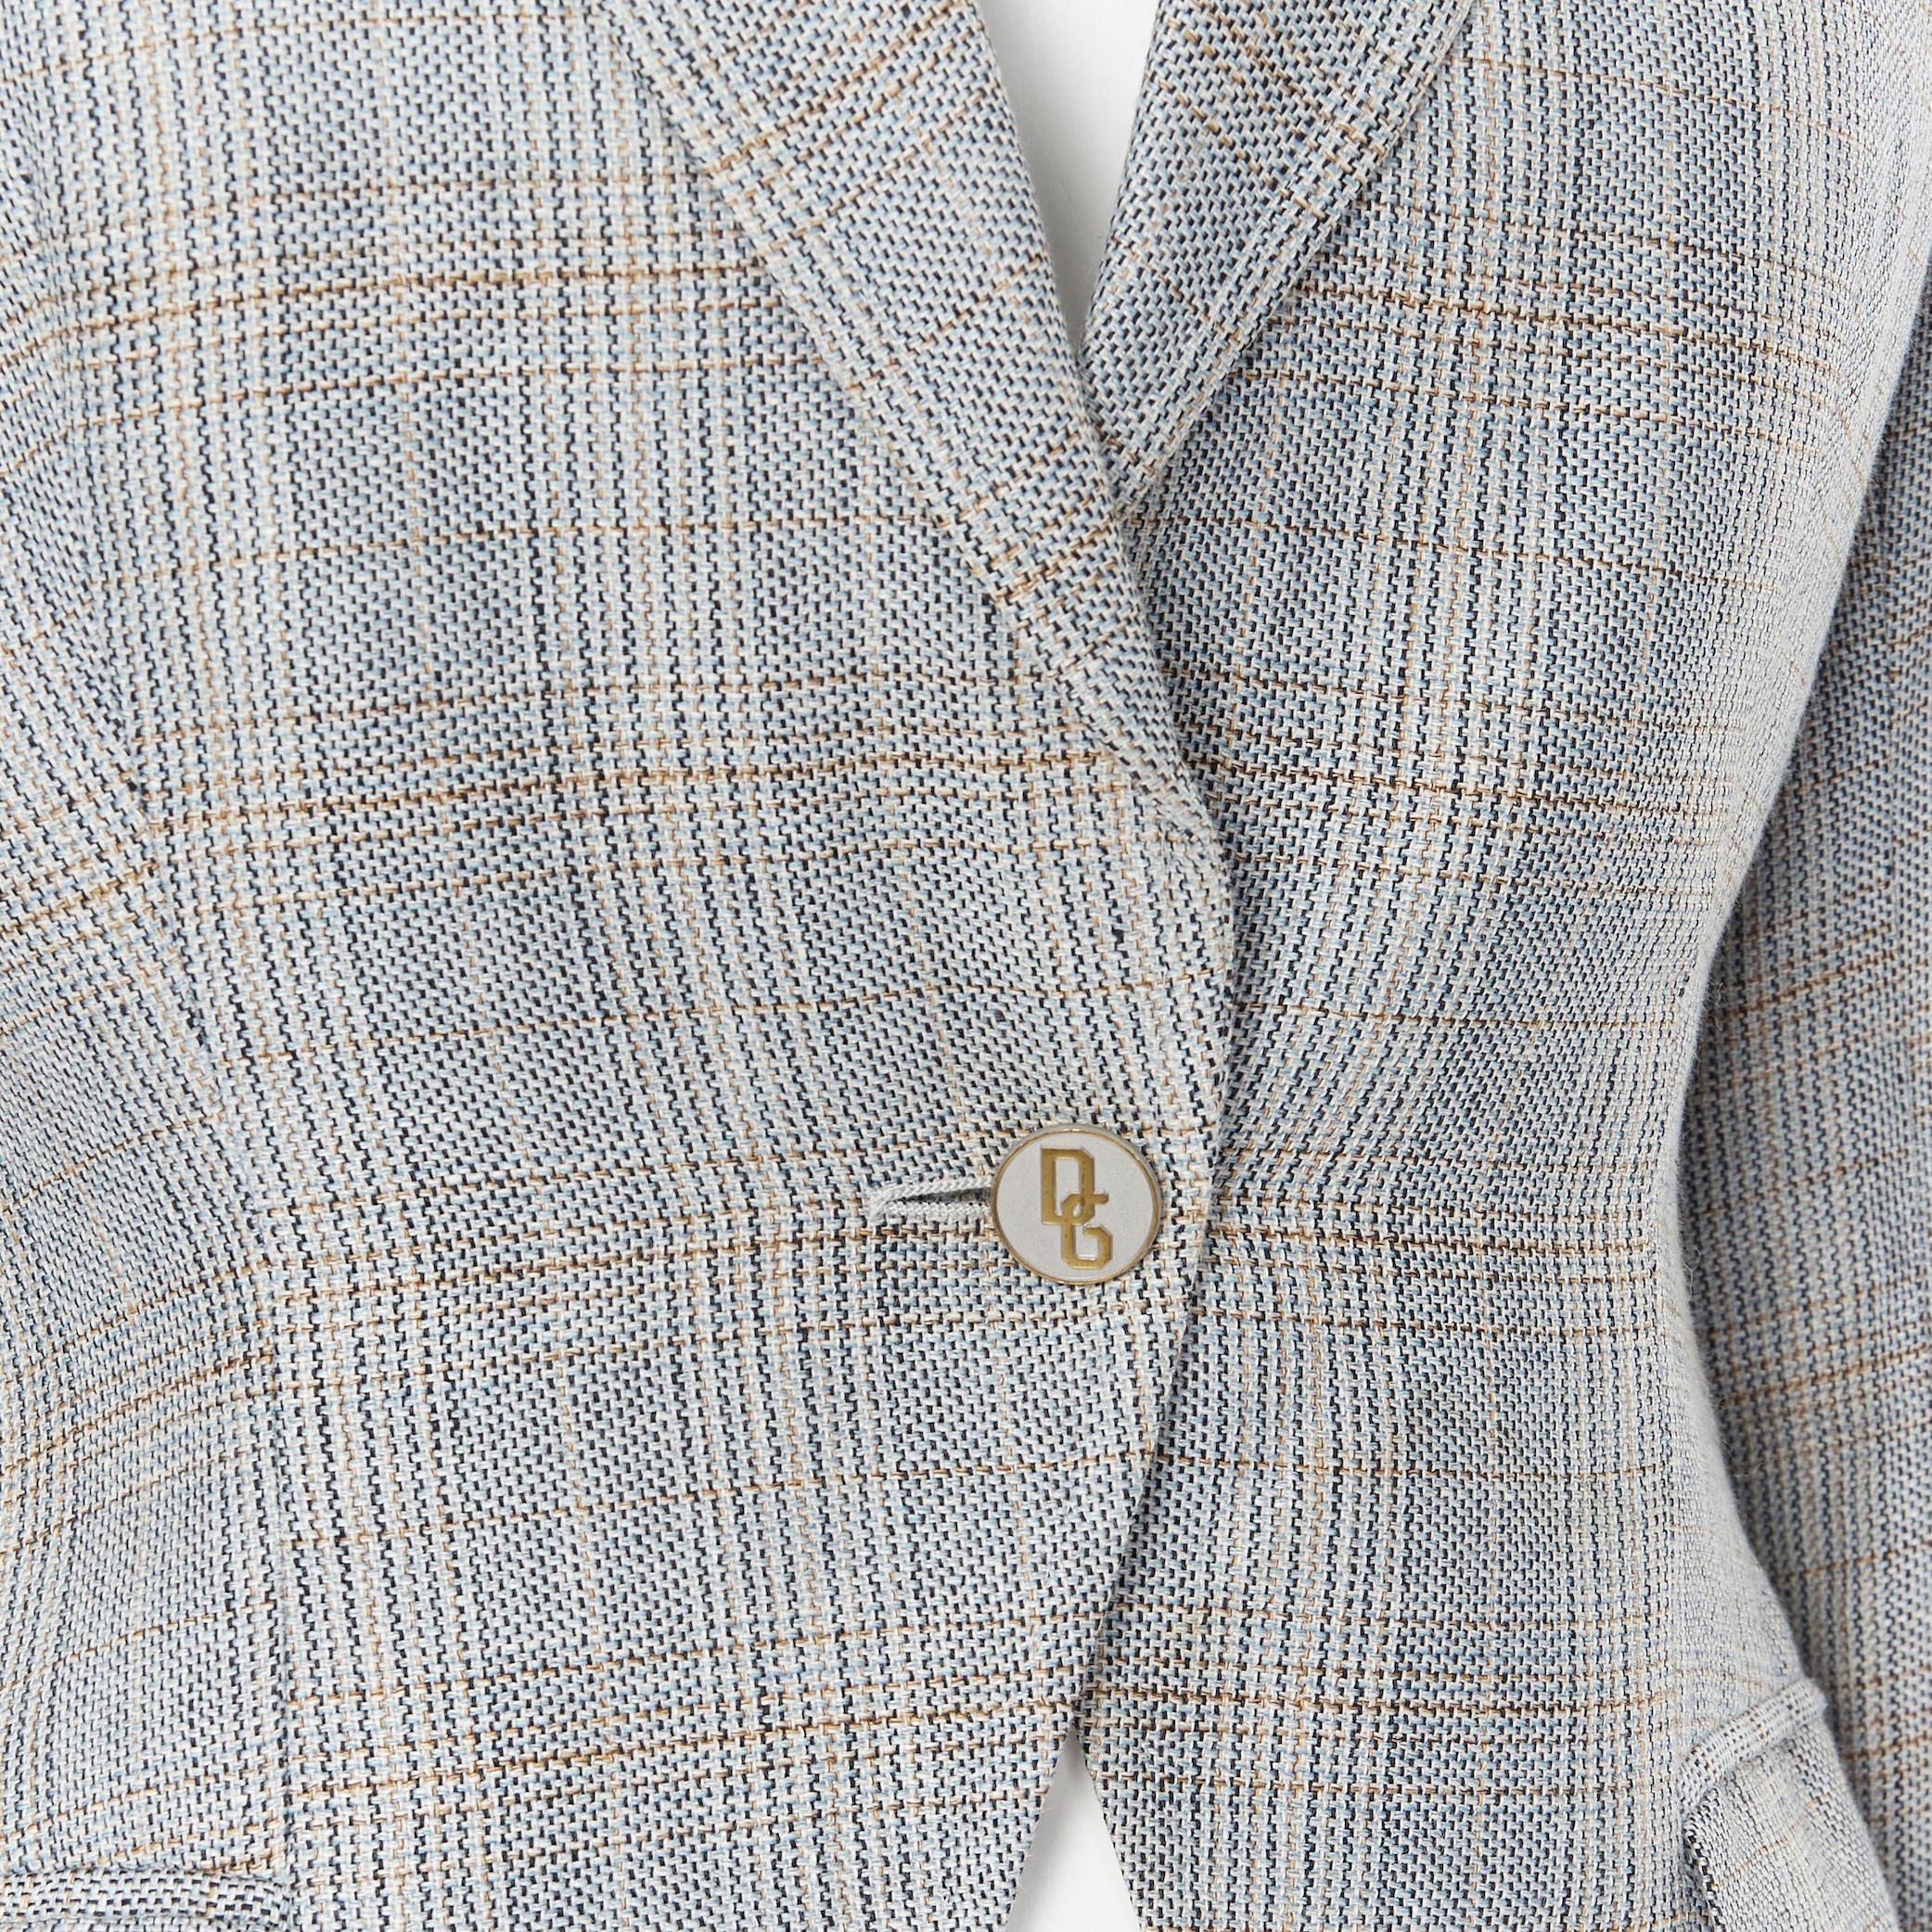 DOLCE GABBANA blue check wool tweed one button cutaway blazer pant suit IT42 M 
Reference: GIYG/A00048 
Brand: Dolce Gabbana 
Material: Wool 
Color: Grey 
Pattern: Solid 
Closure: Button 
Extra Detail: This blazer comes with the complimentary